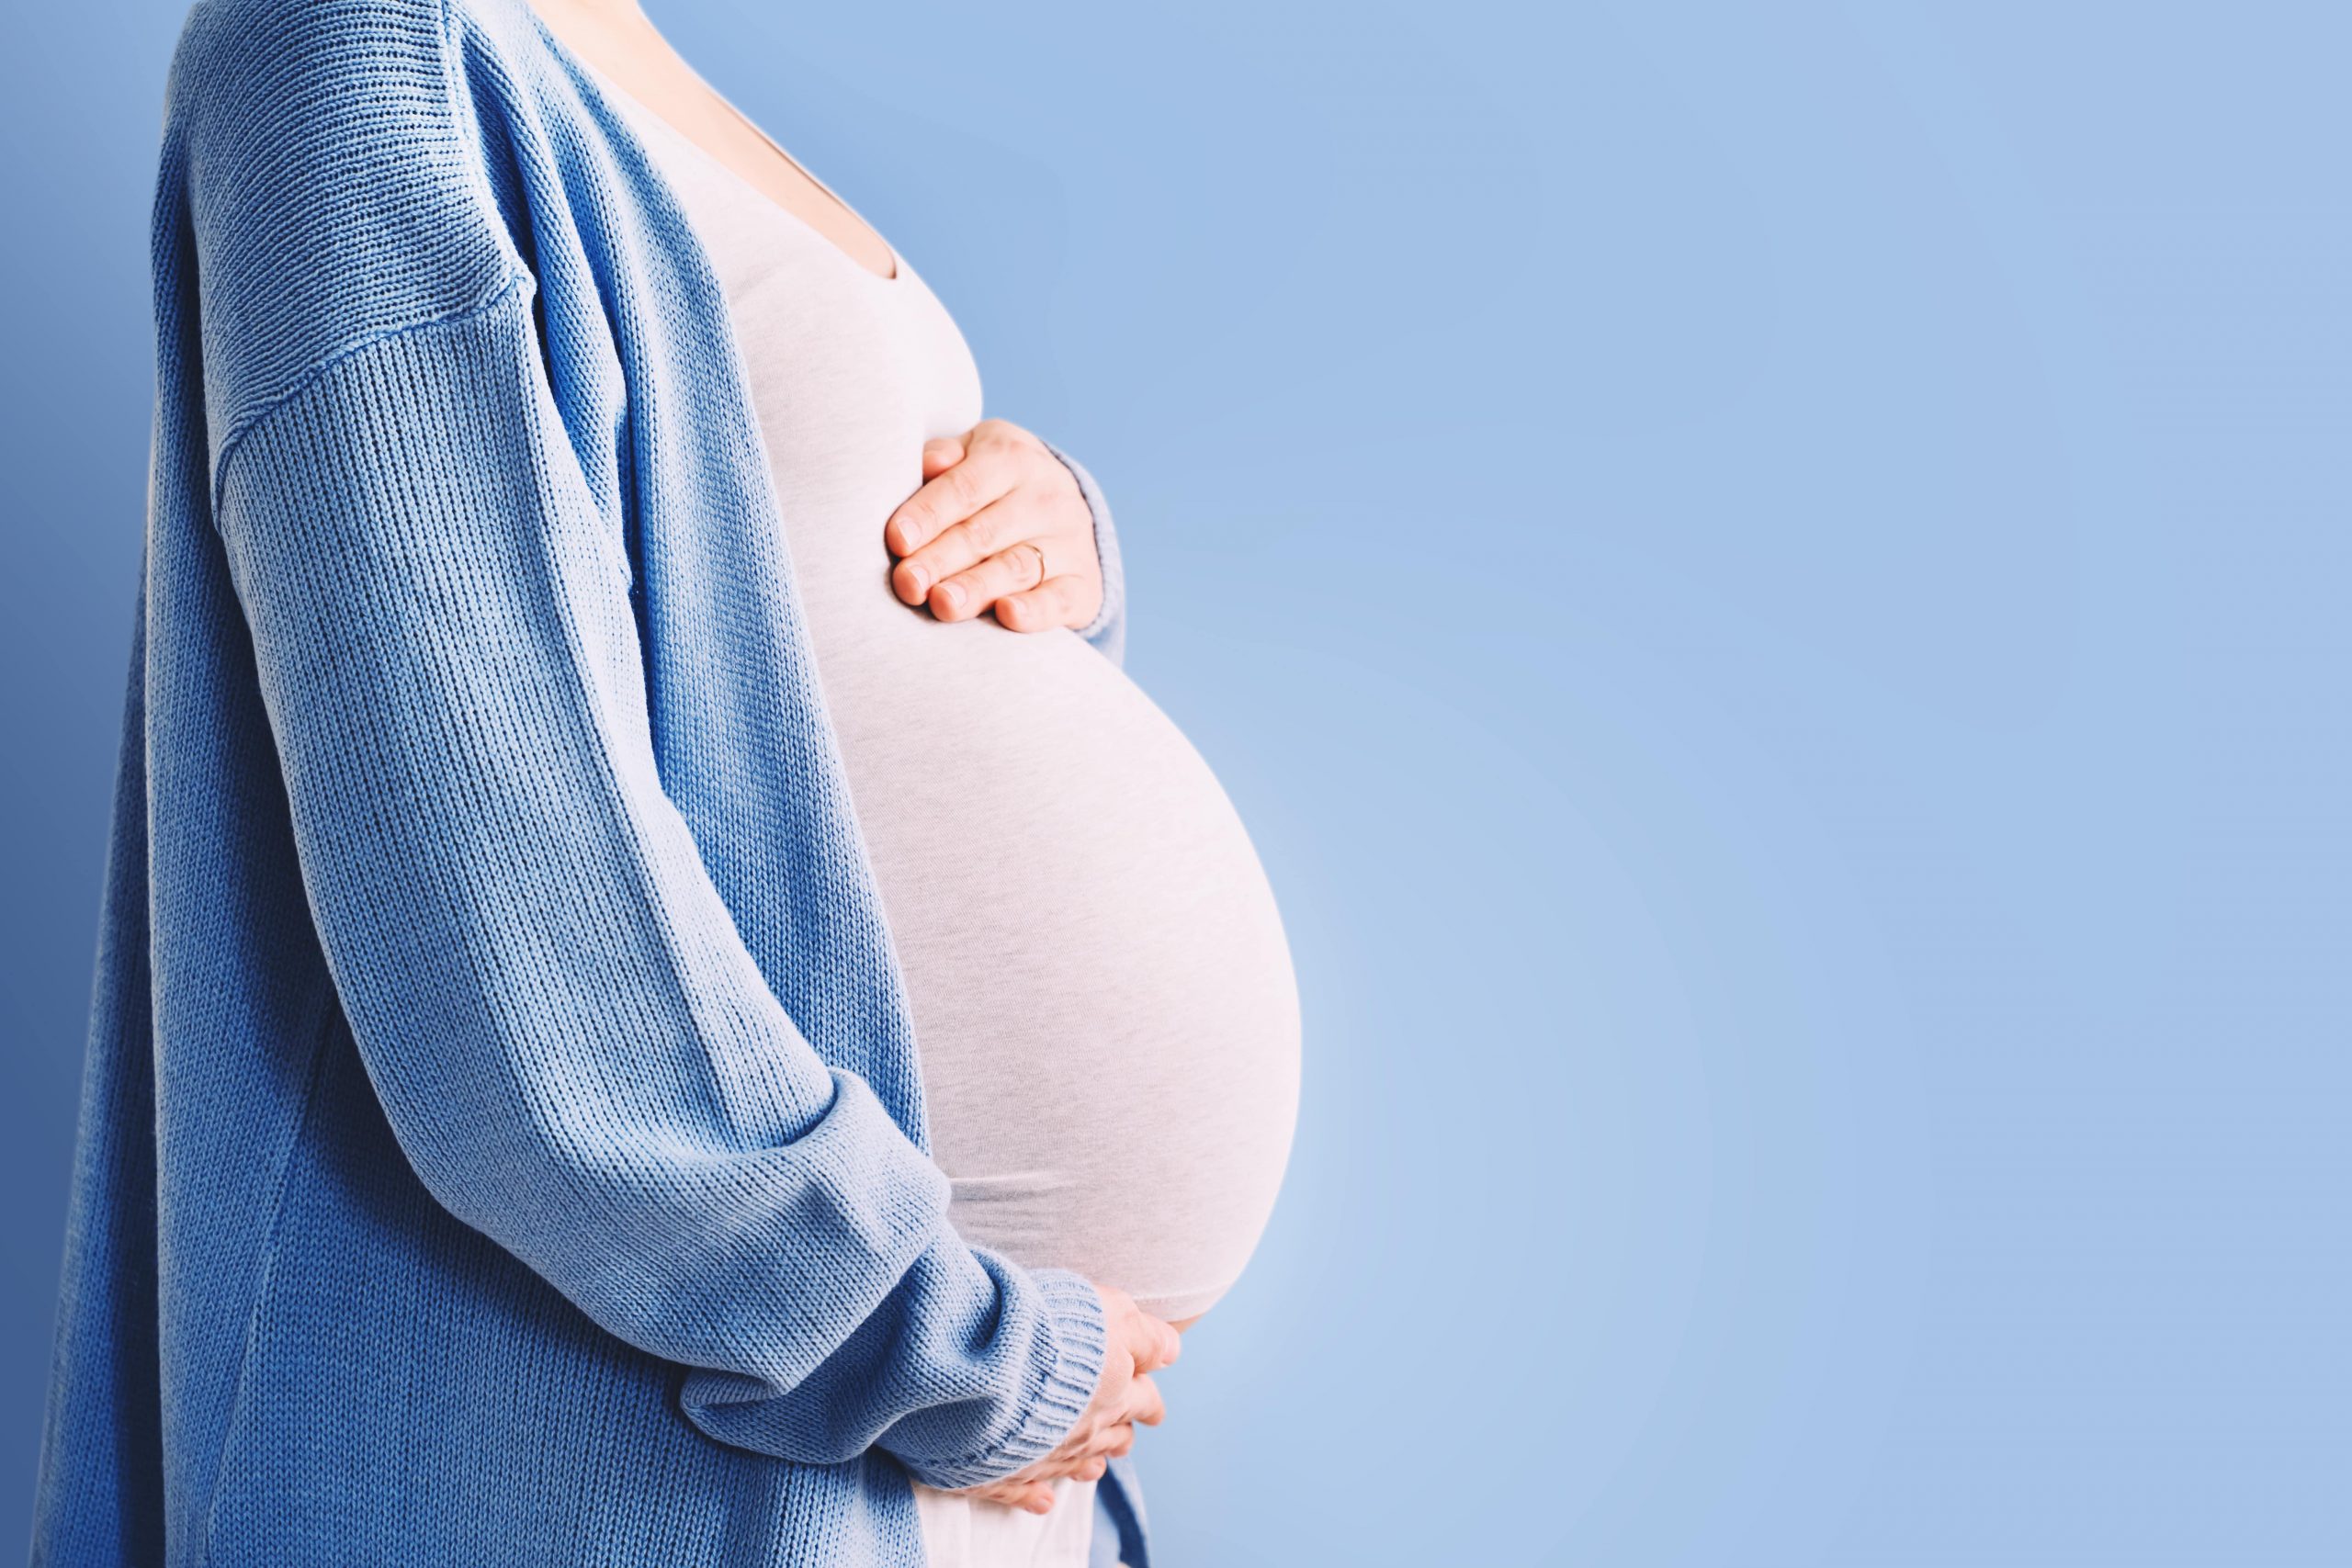 stock photo of a pregnant woman wearing a blue sweater and jeans.